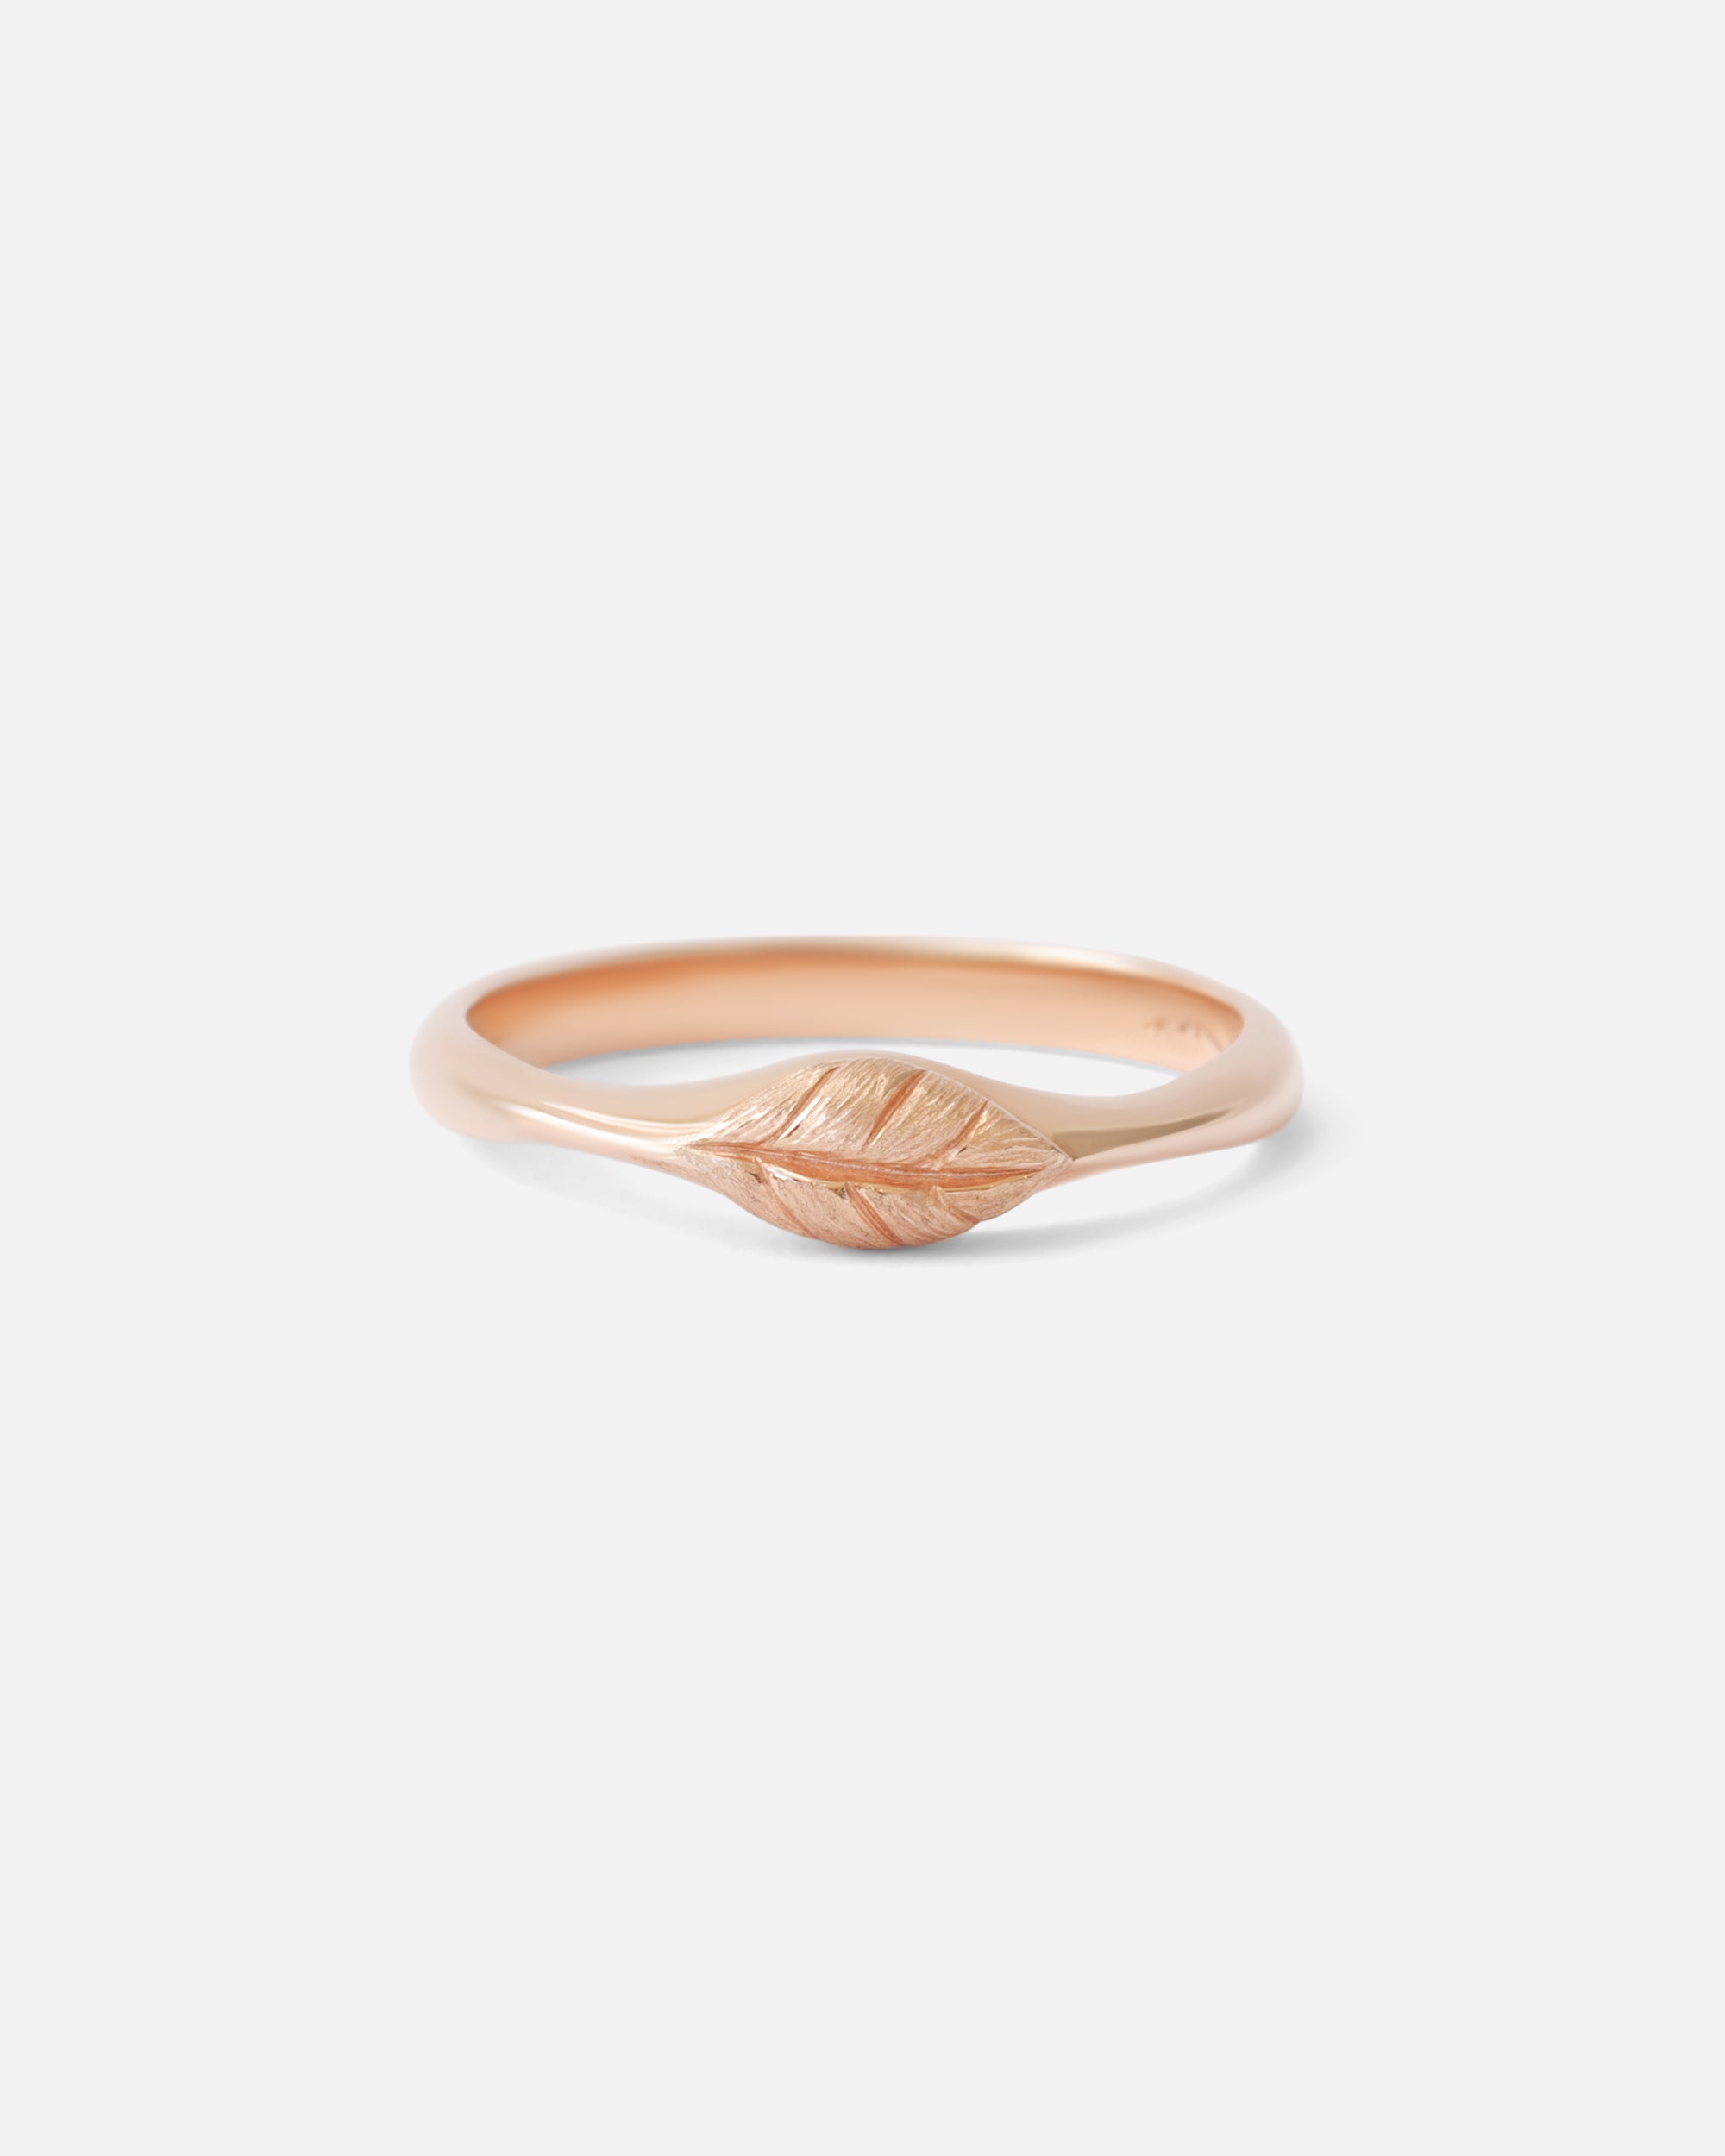 Single Leaf Stacker / Ring Ready To Ship 14k Rose Gold 6 By O Channell Designs in rings Category